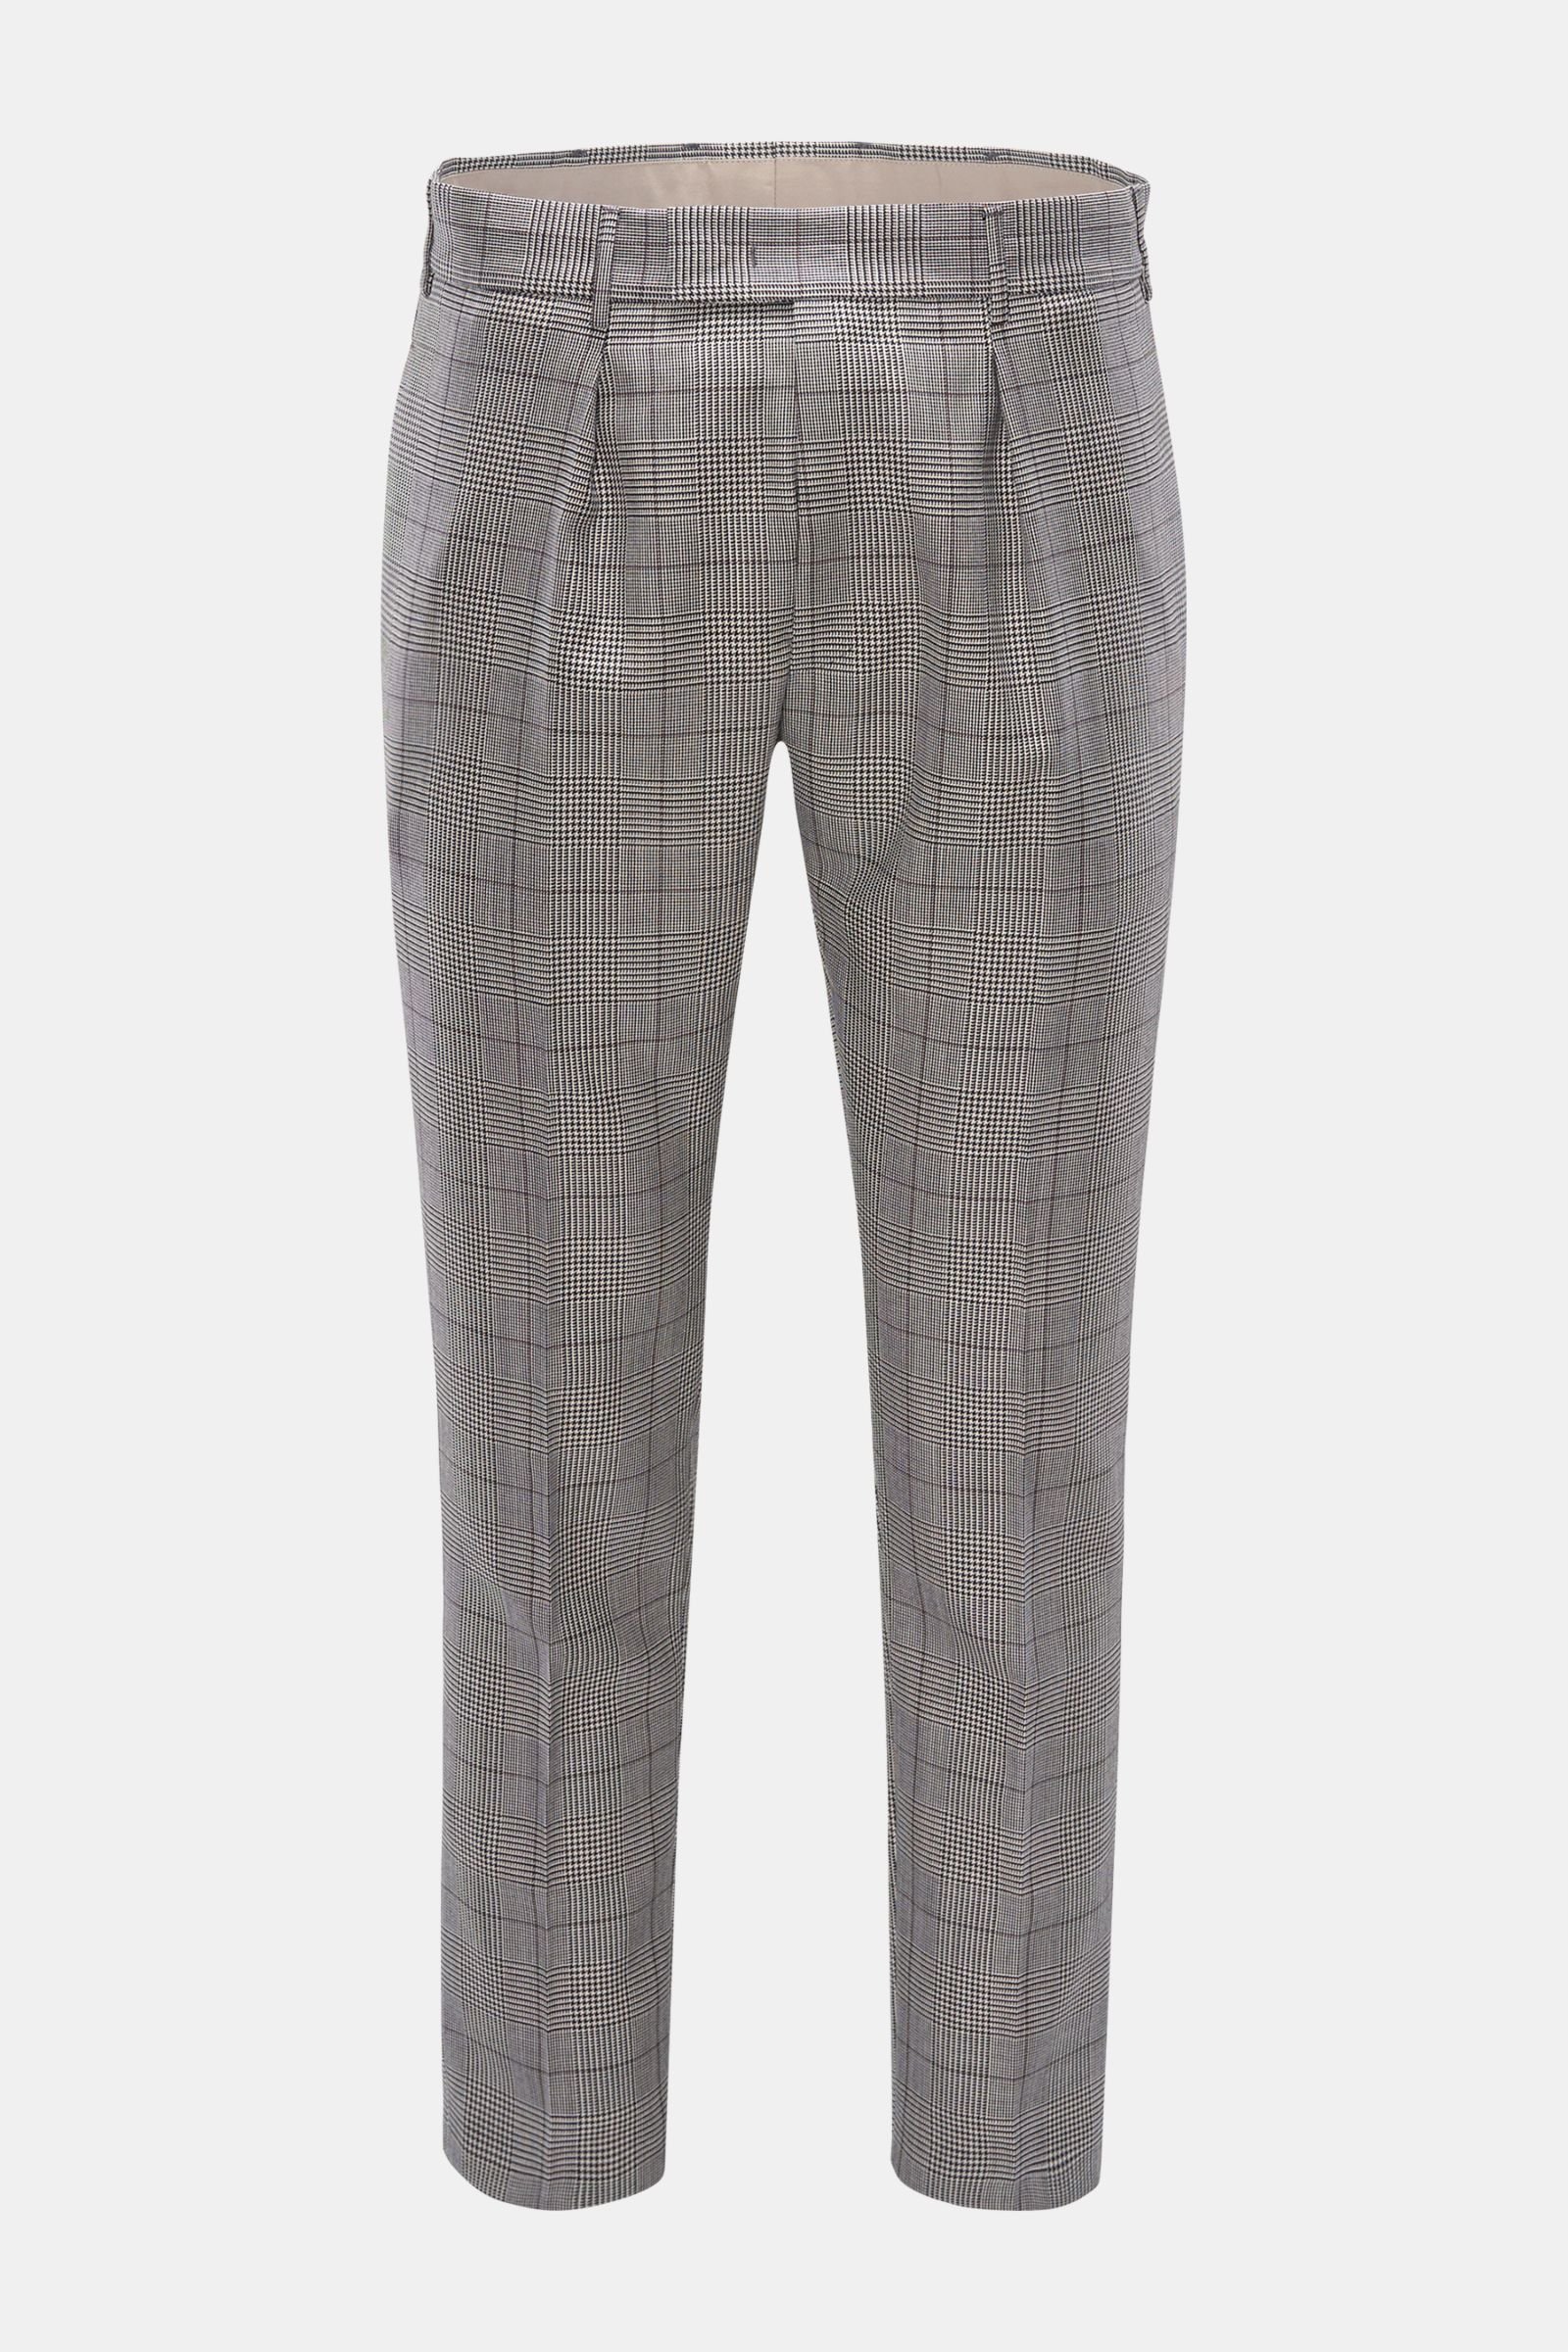 Wool trousers 'Undici' beige/black checked